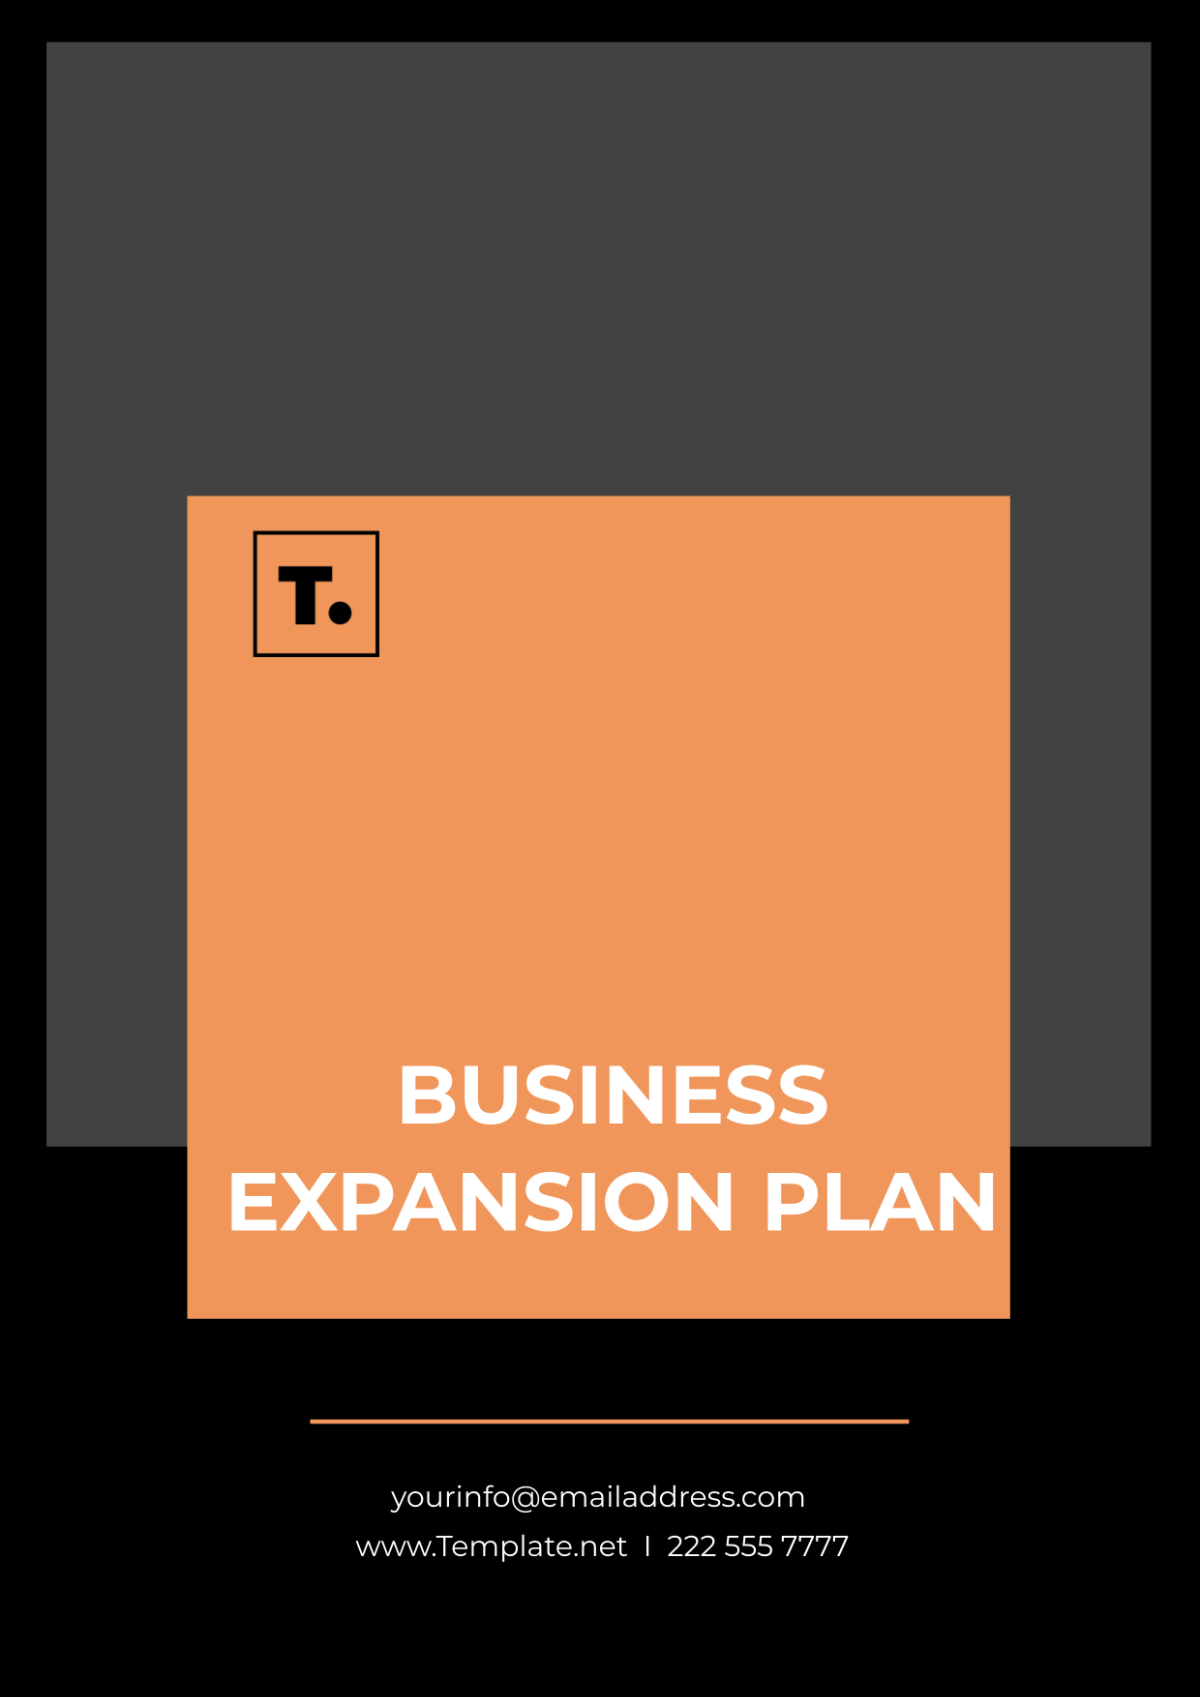 Business Expansion Plan Template